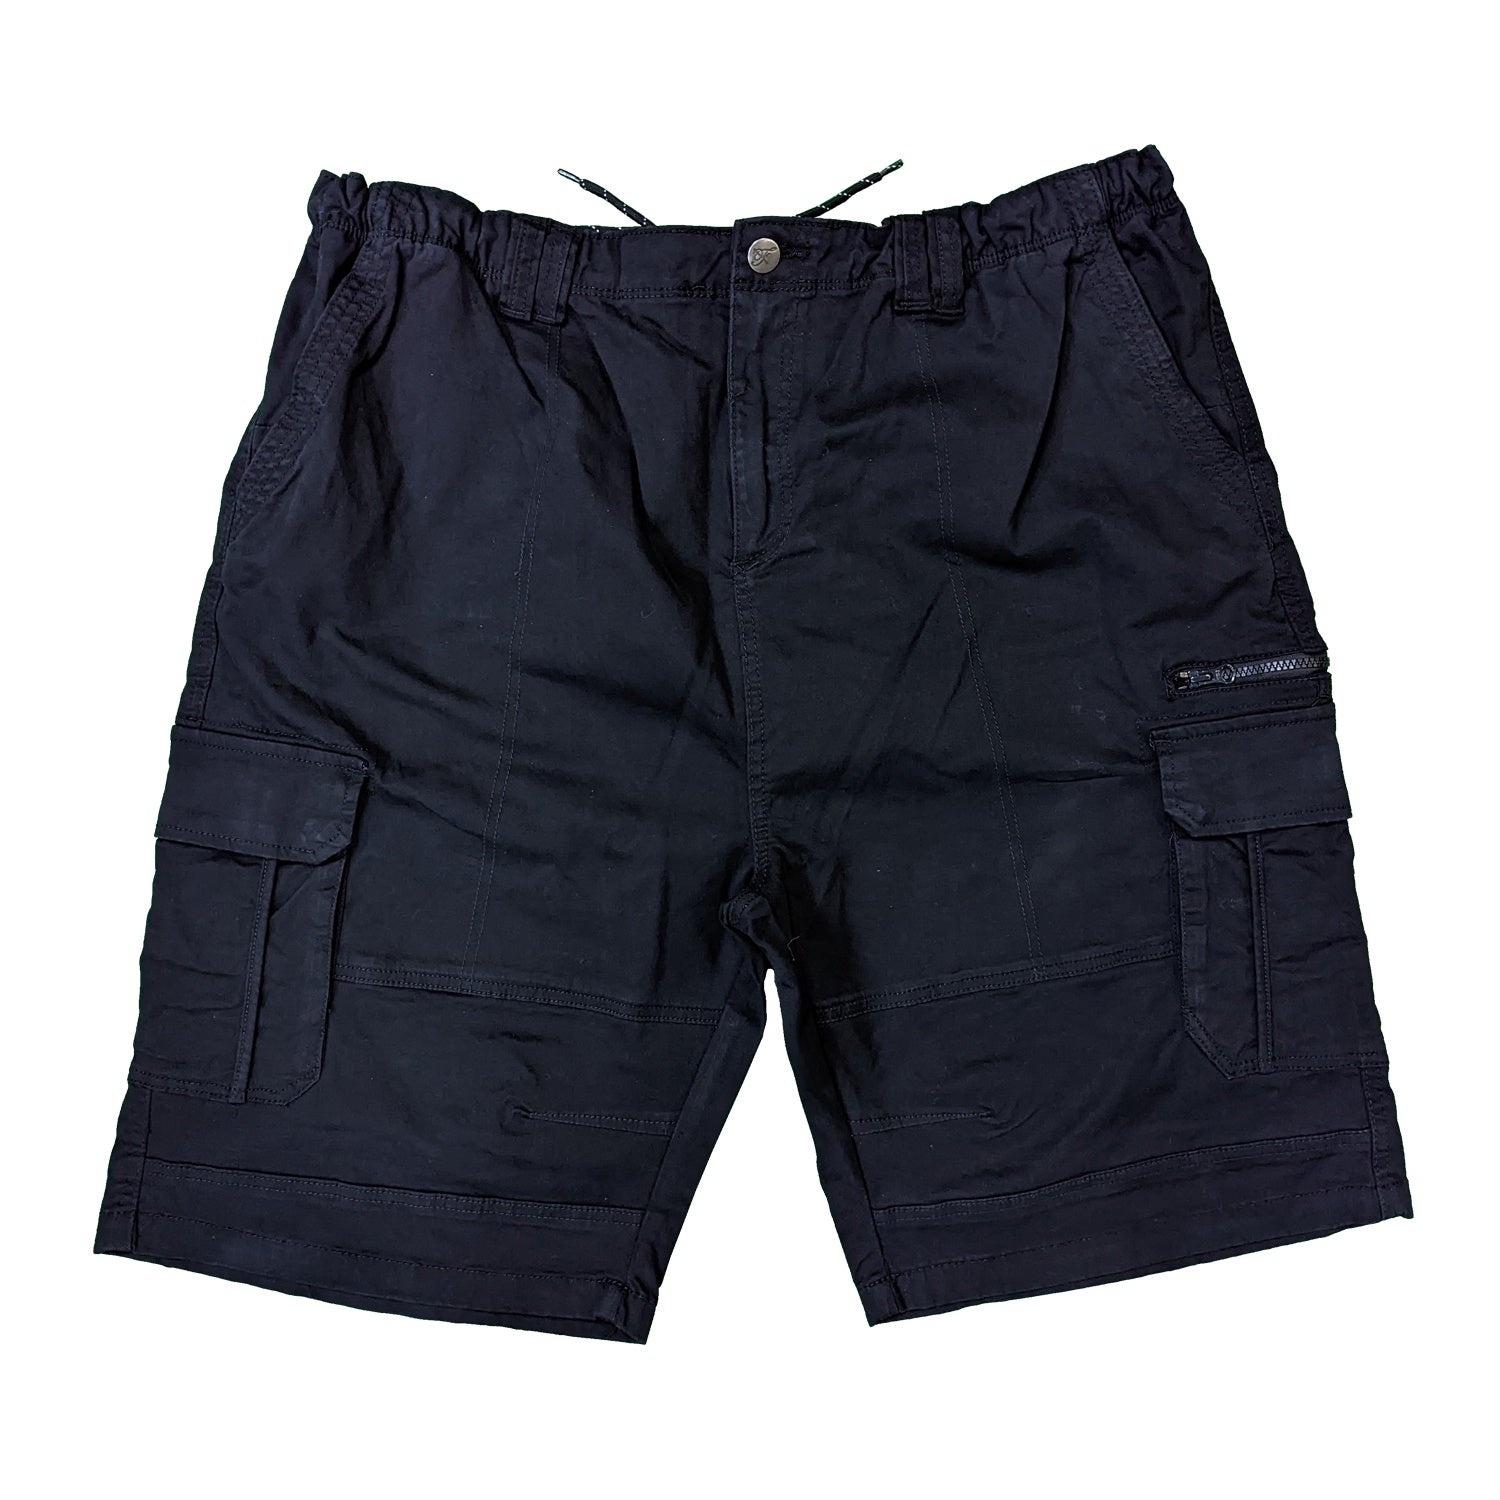 Forge Stretch Cargo Shorts - FBS 351 - Black 1